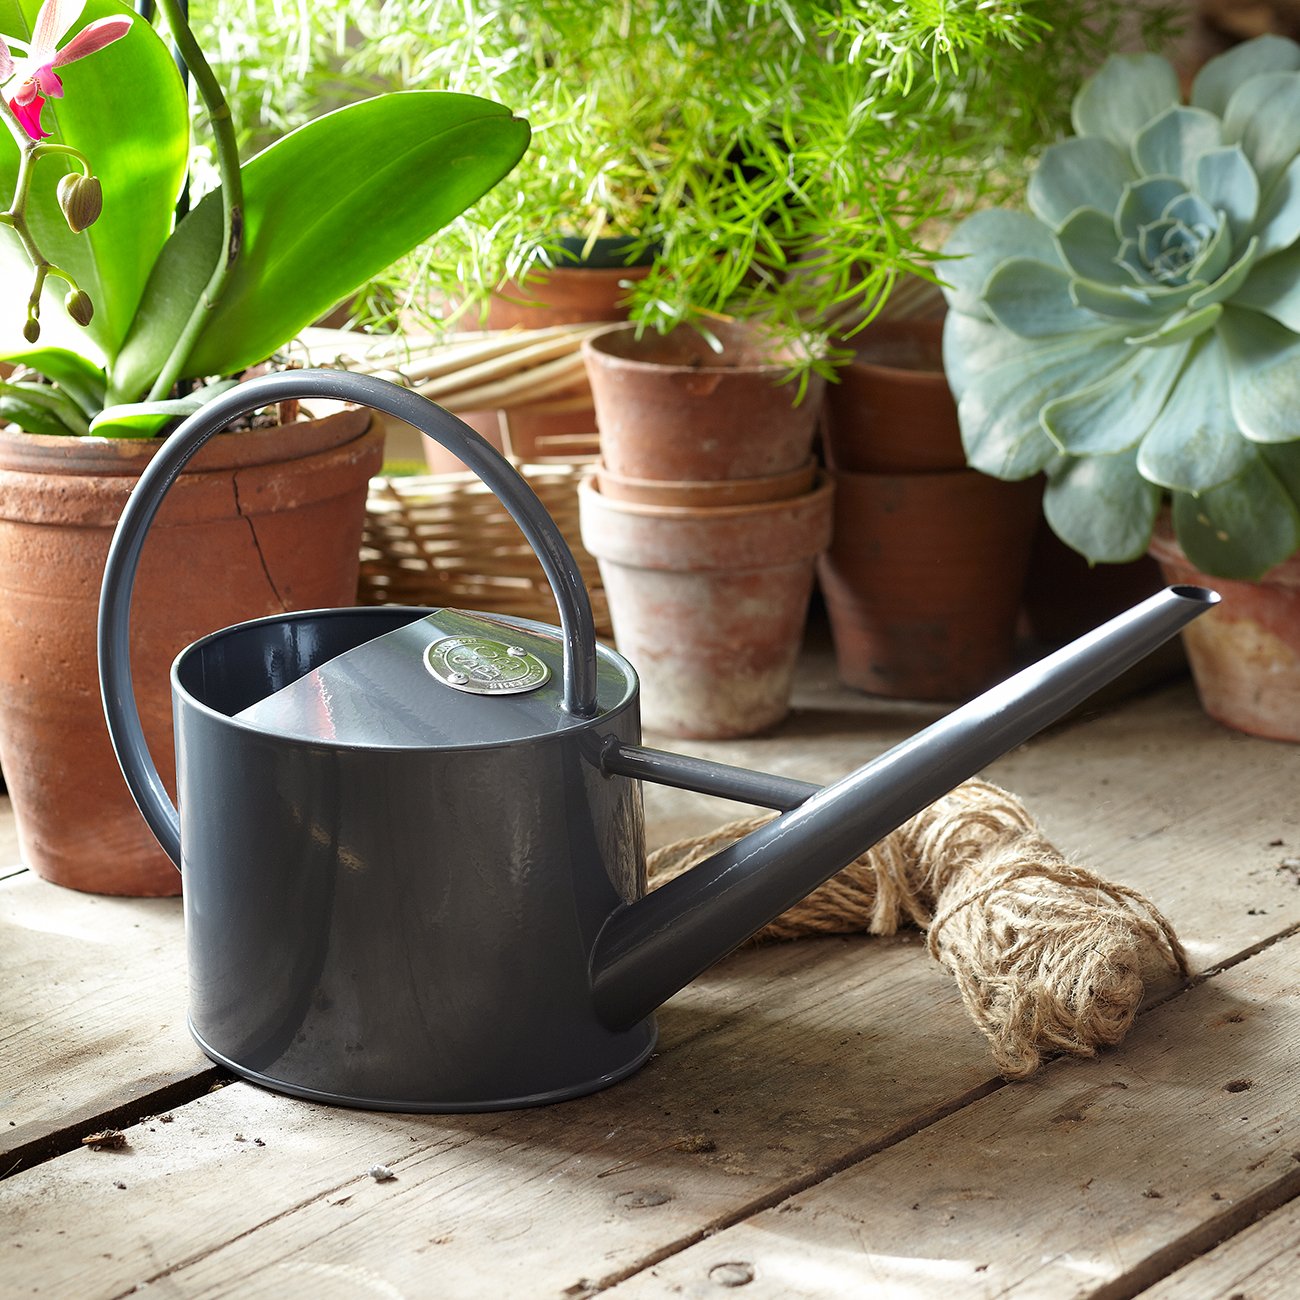 Sophie Conran, of the well-known Conran British design dynasty, brings her contemporary country house style to a wide range of garden tools and accessories.